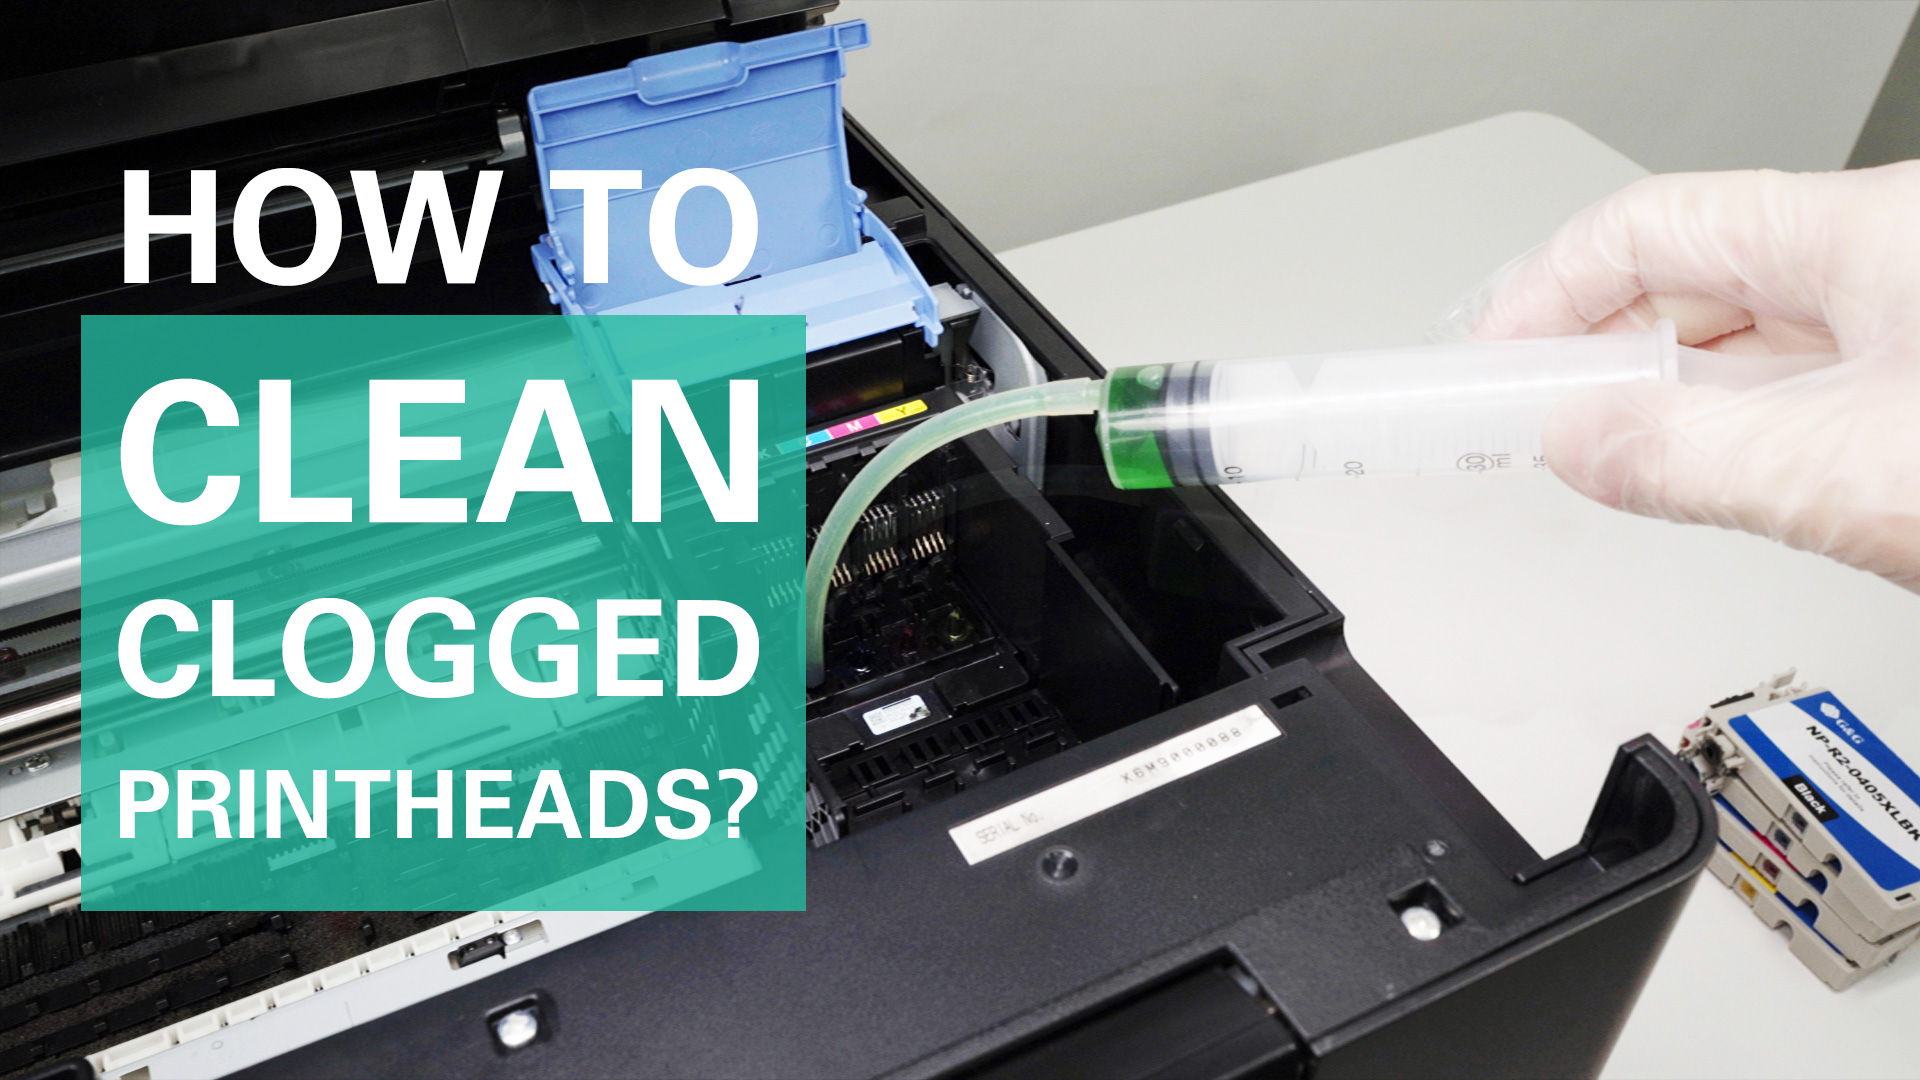 How to Clean Clogged Printheads